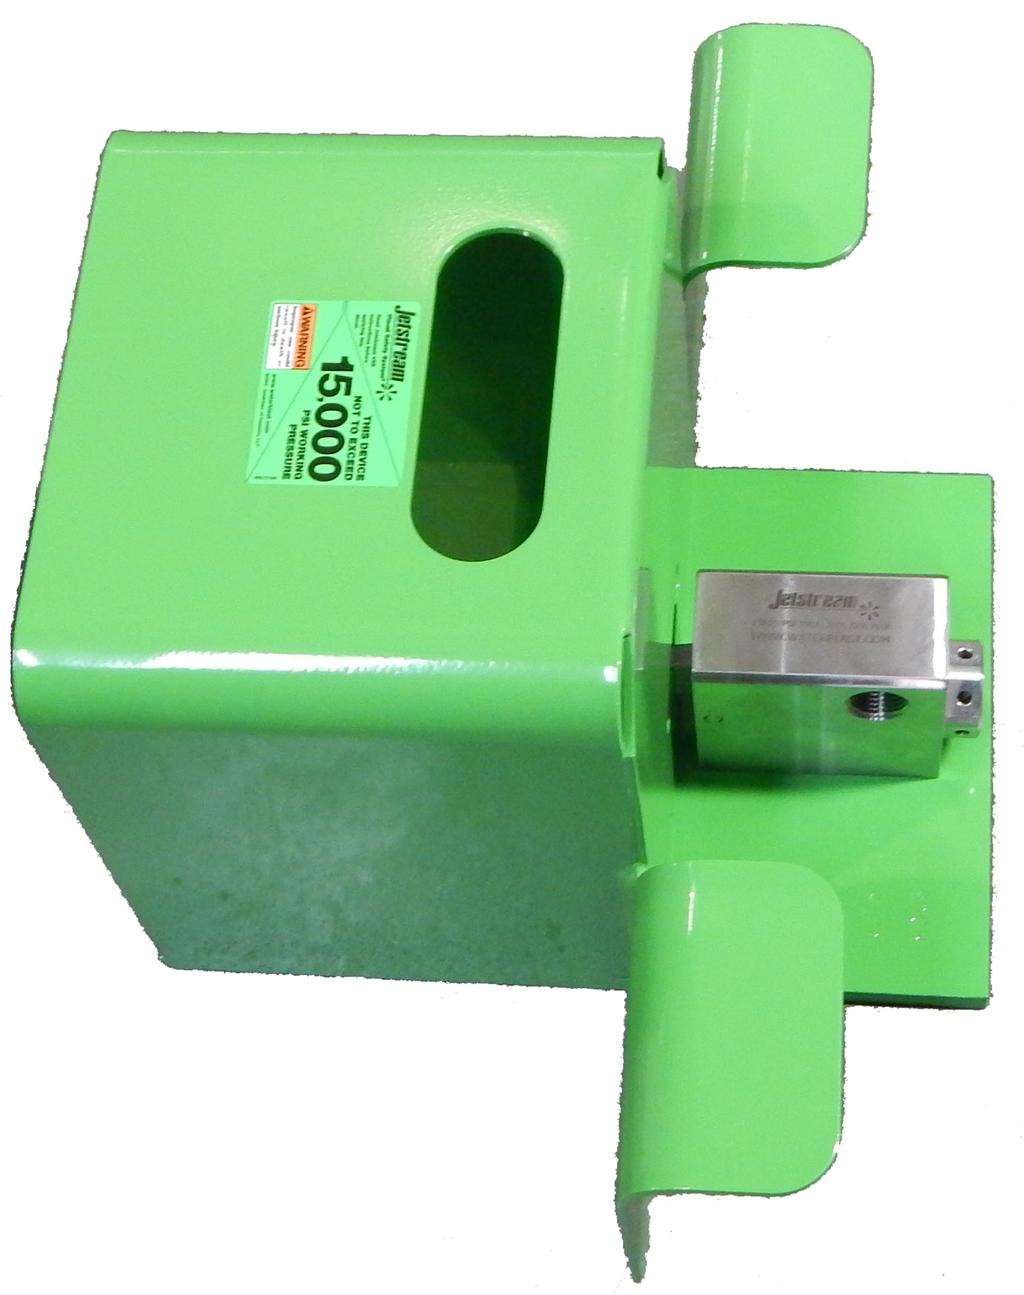 DURASAFE FOOT GUNS SHUT-IN STYLE Ideal for a variety of waterblast tube cleaning applications, the DCFSi-15 DuraSafe foot-operated shut-in style control gun allows the operator to have